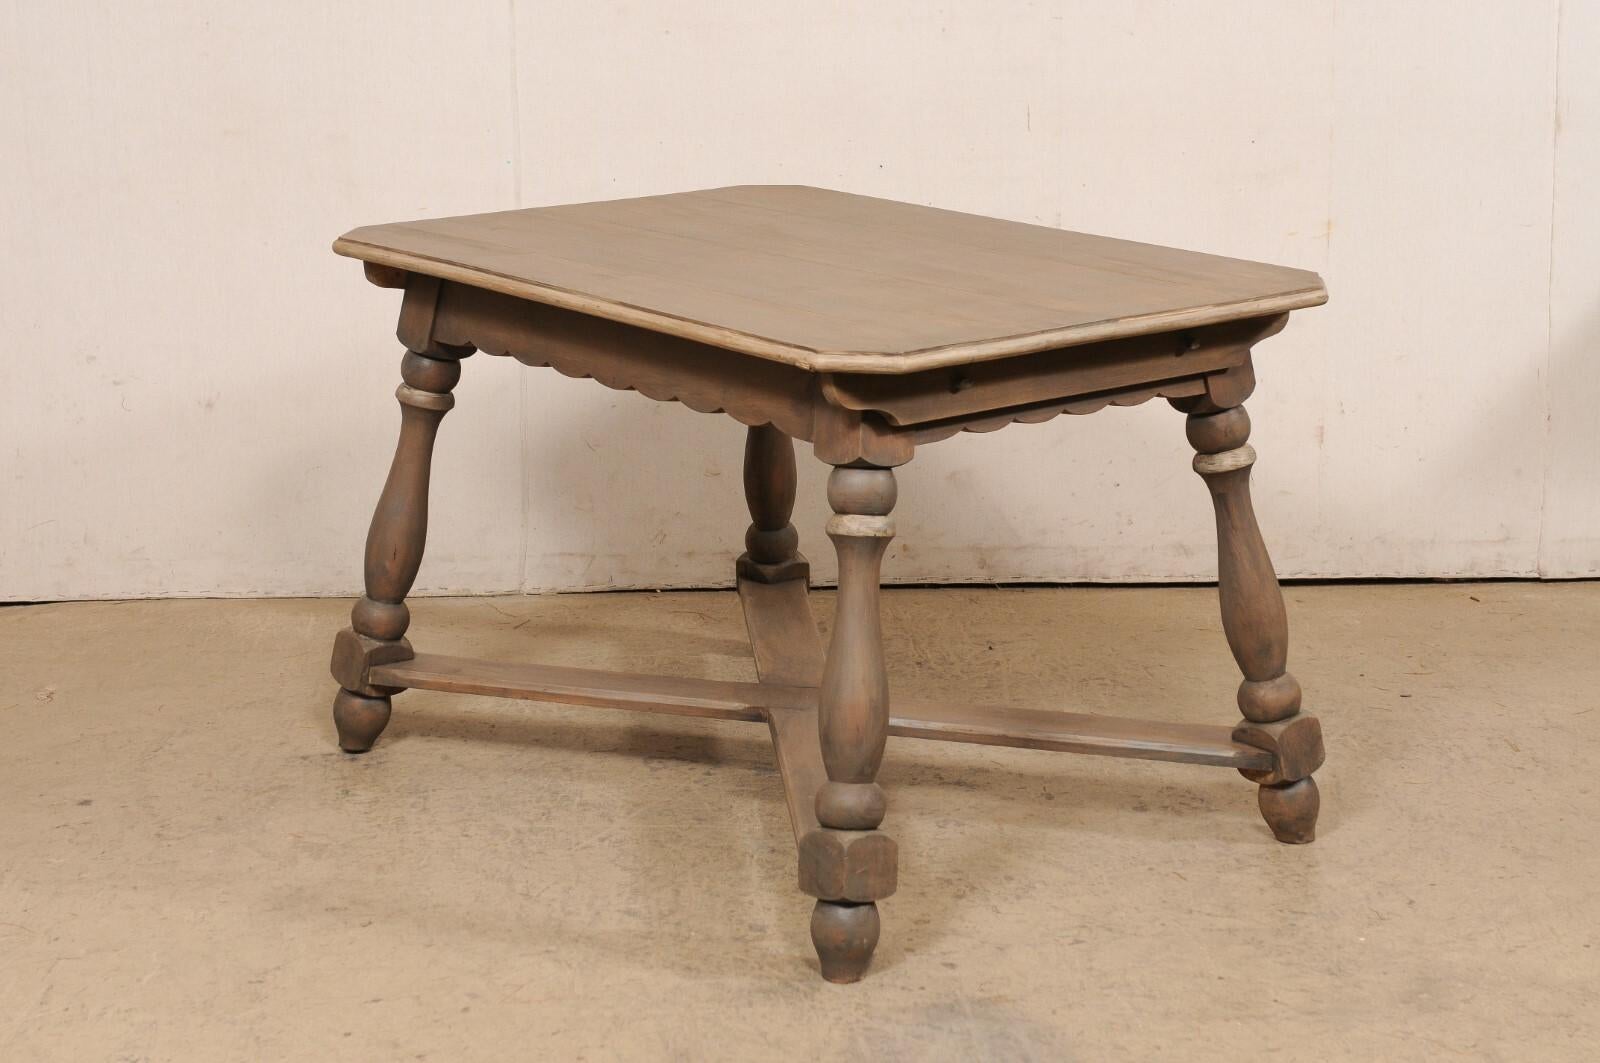 European Wooden Table w/Scalloped Apron, Nicely Turned Legs & X-Stretcher For Sale 4